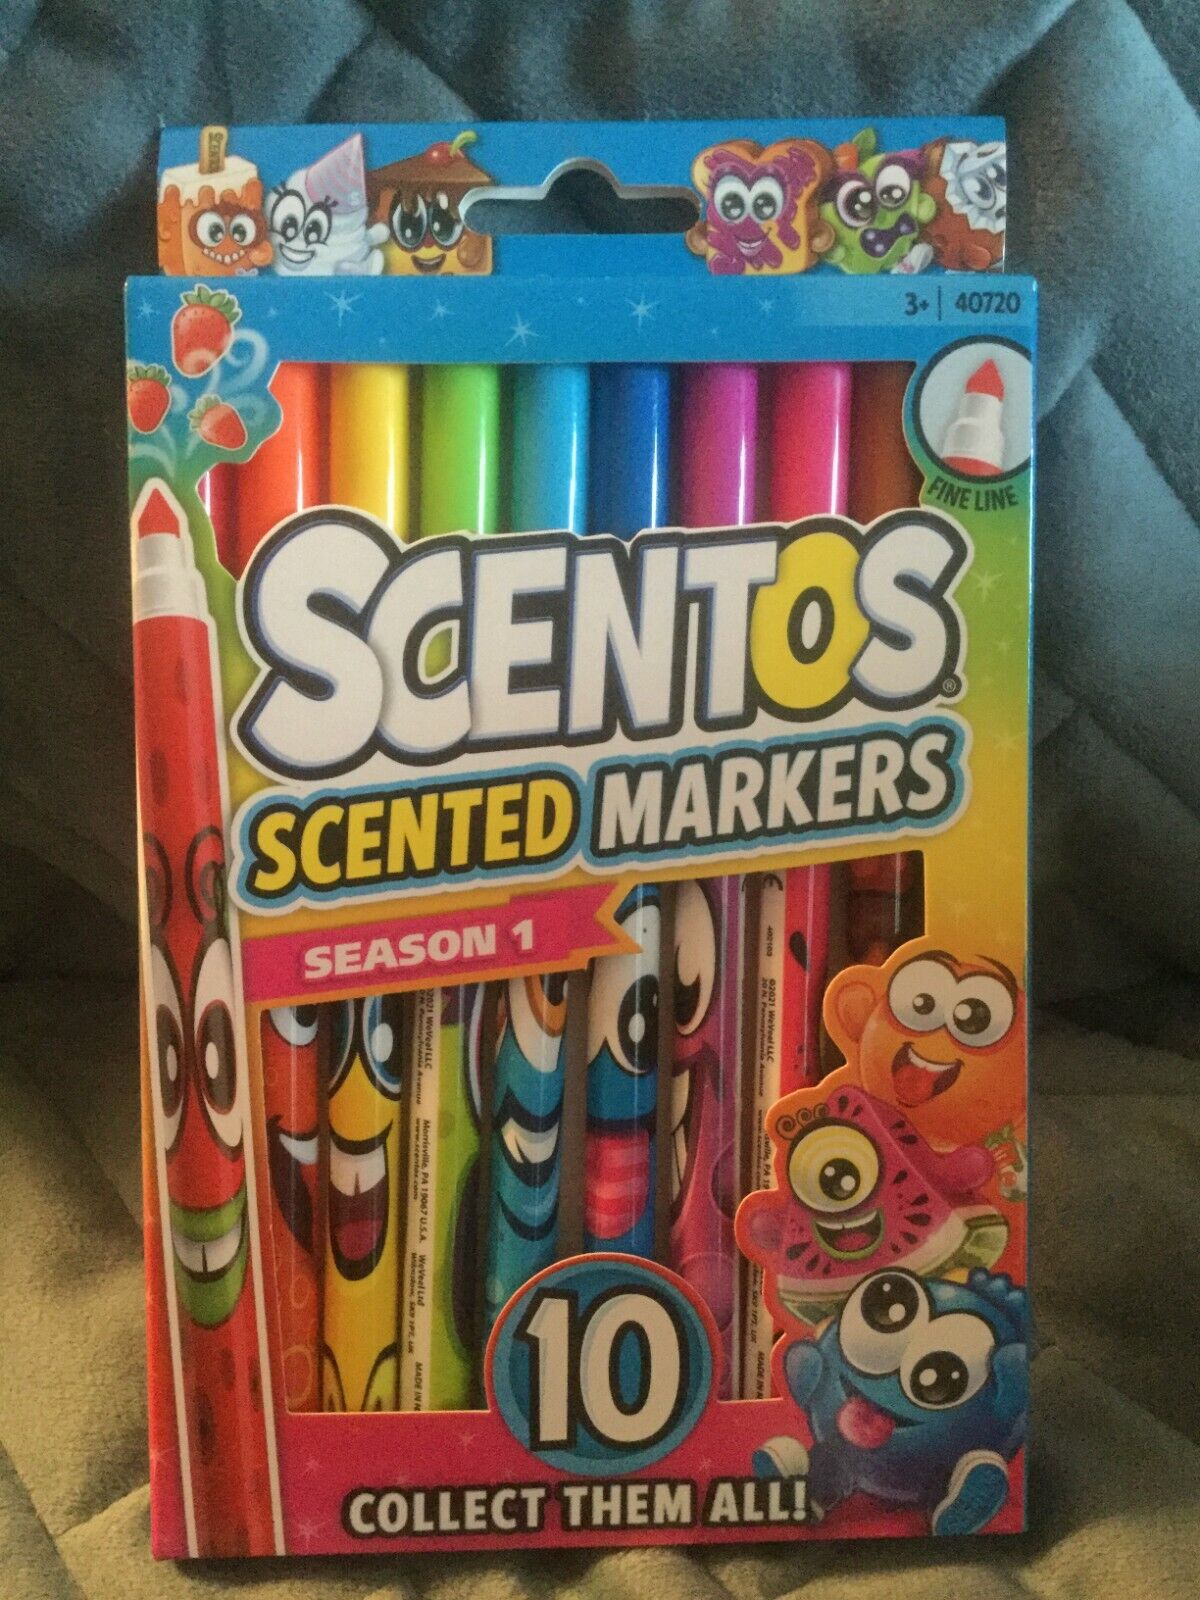 SCENTOS SCENTED MARKERS SEASON 1 FINE LINES AGES 3+ #40720 10 PACK